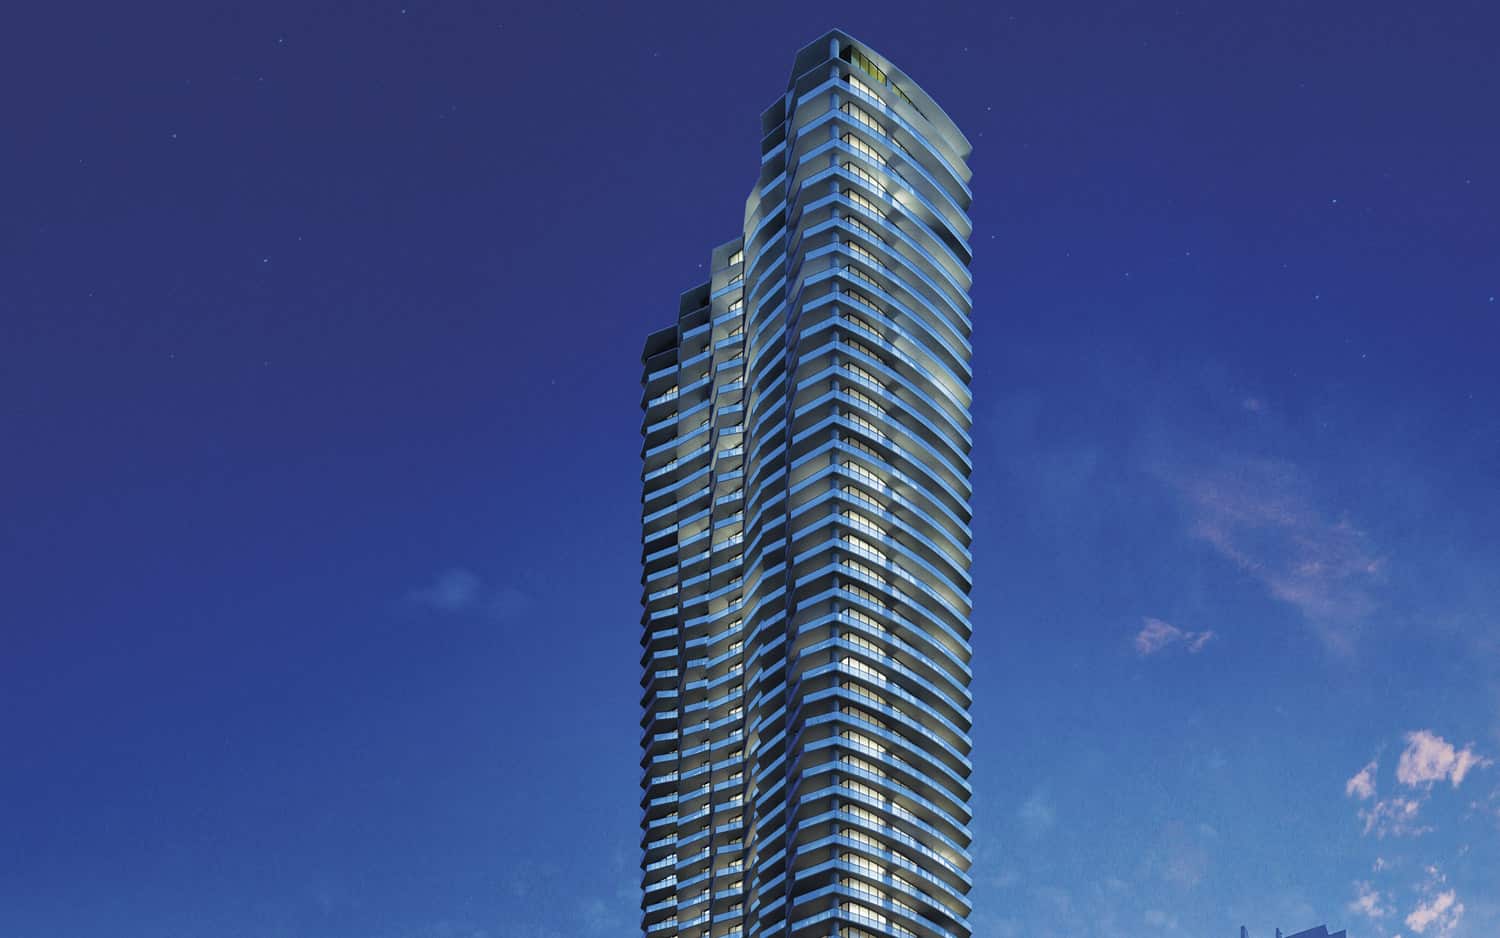 The Baccarat Residences close-up